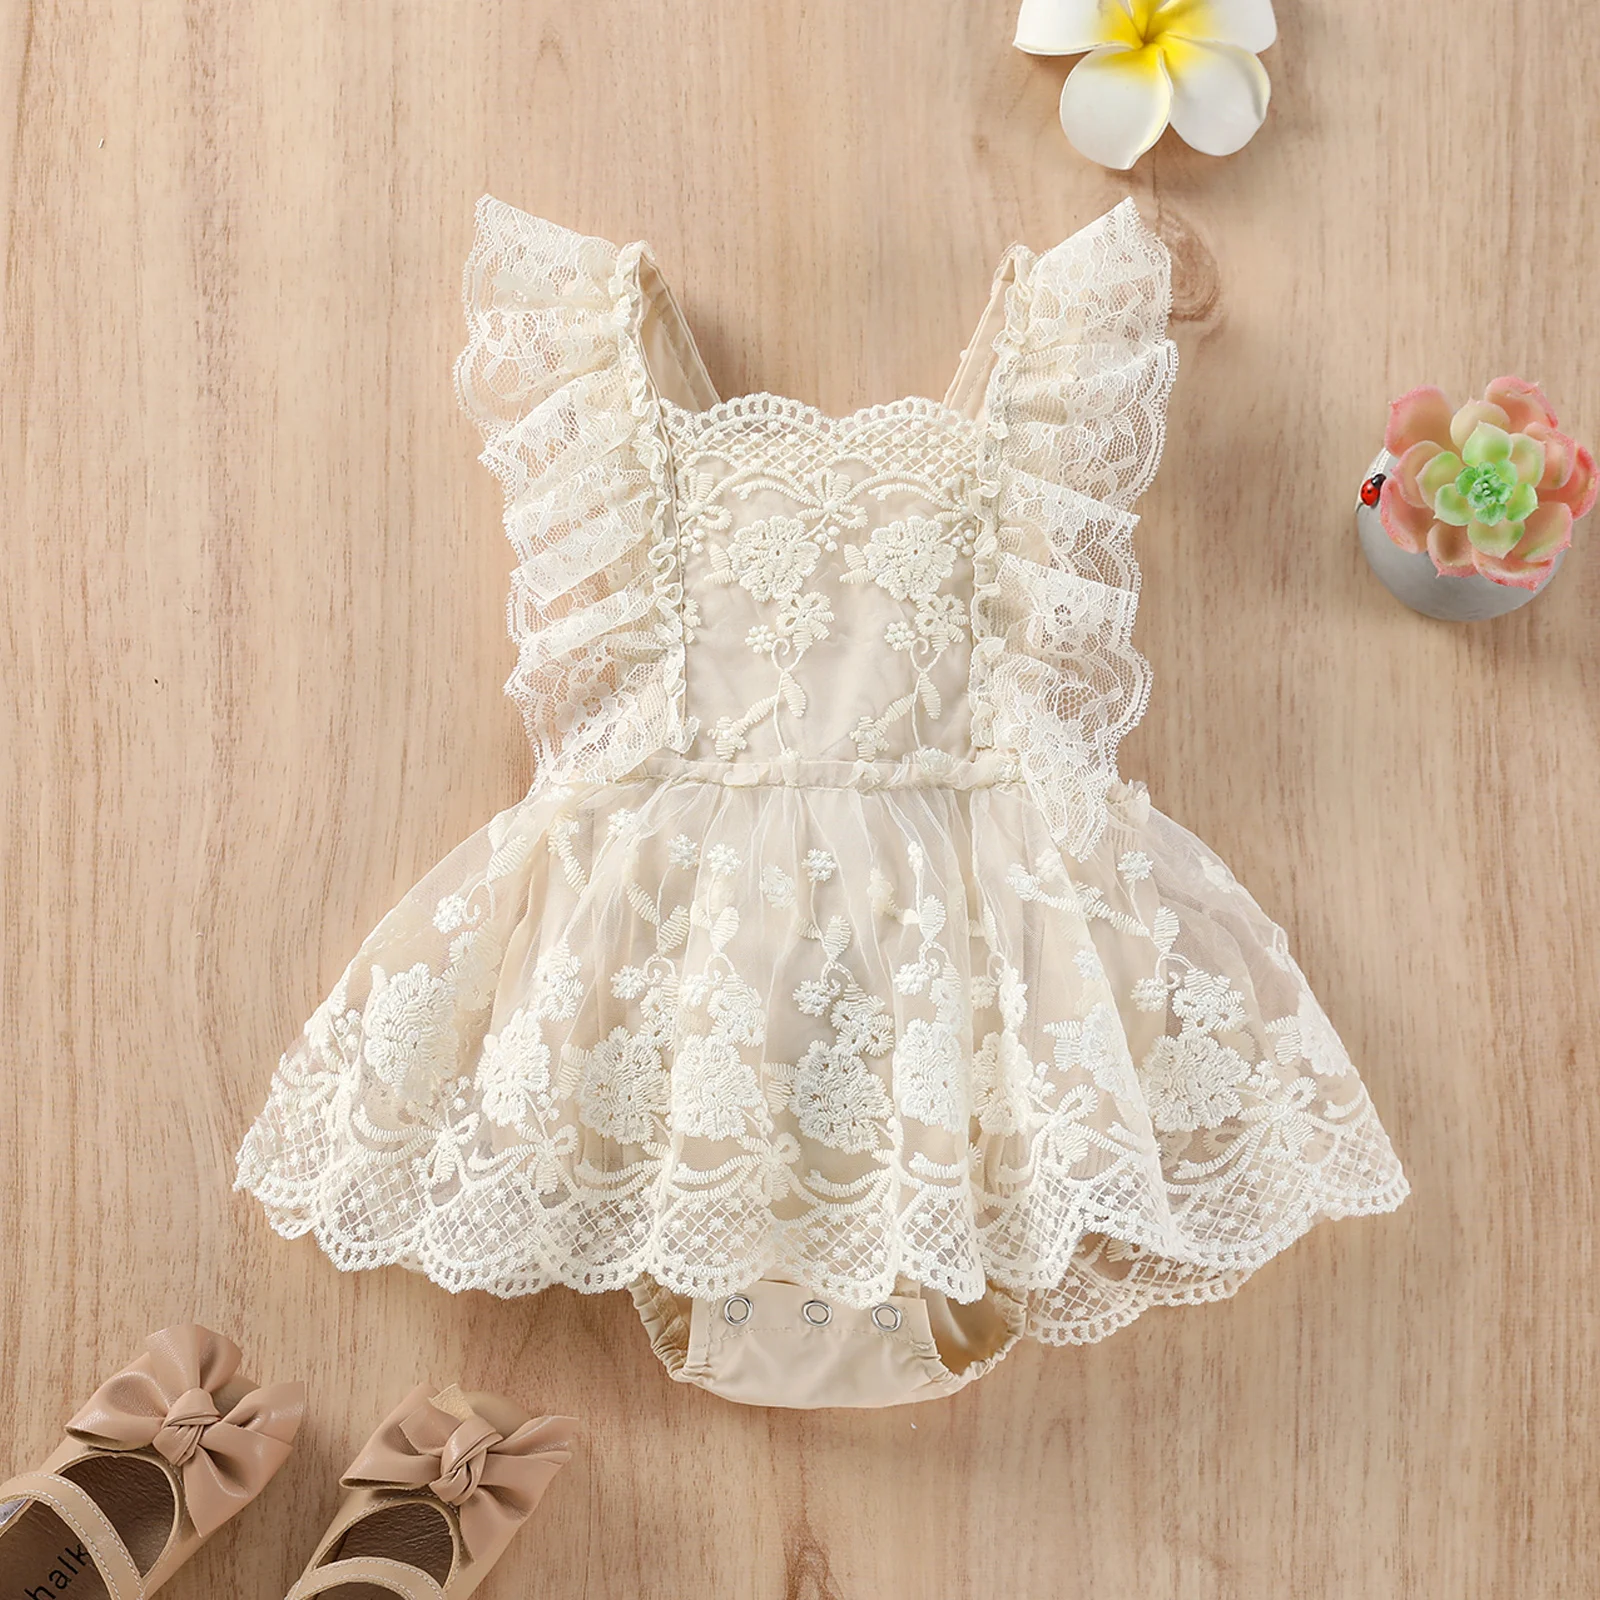 

Baby Girls Summer Bodysuit Plain Floral Lace Embroidery Skirt Layered Adjustable Straps Snap Triangle-Bottom Romper Jumpsuit